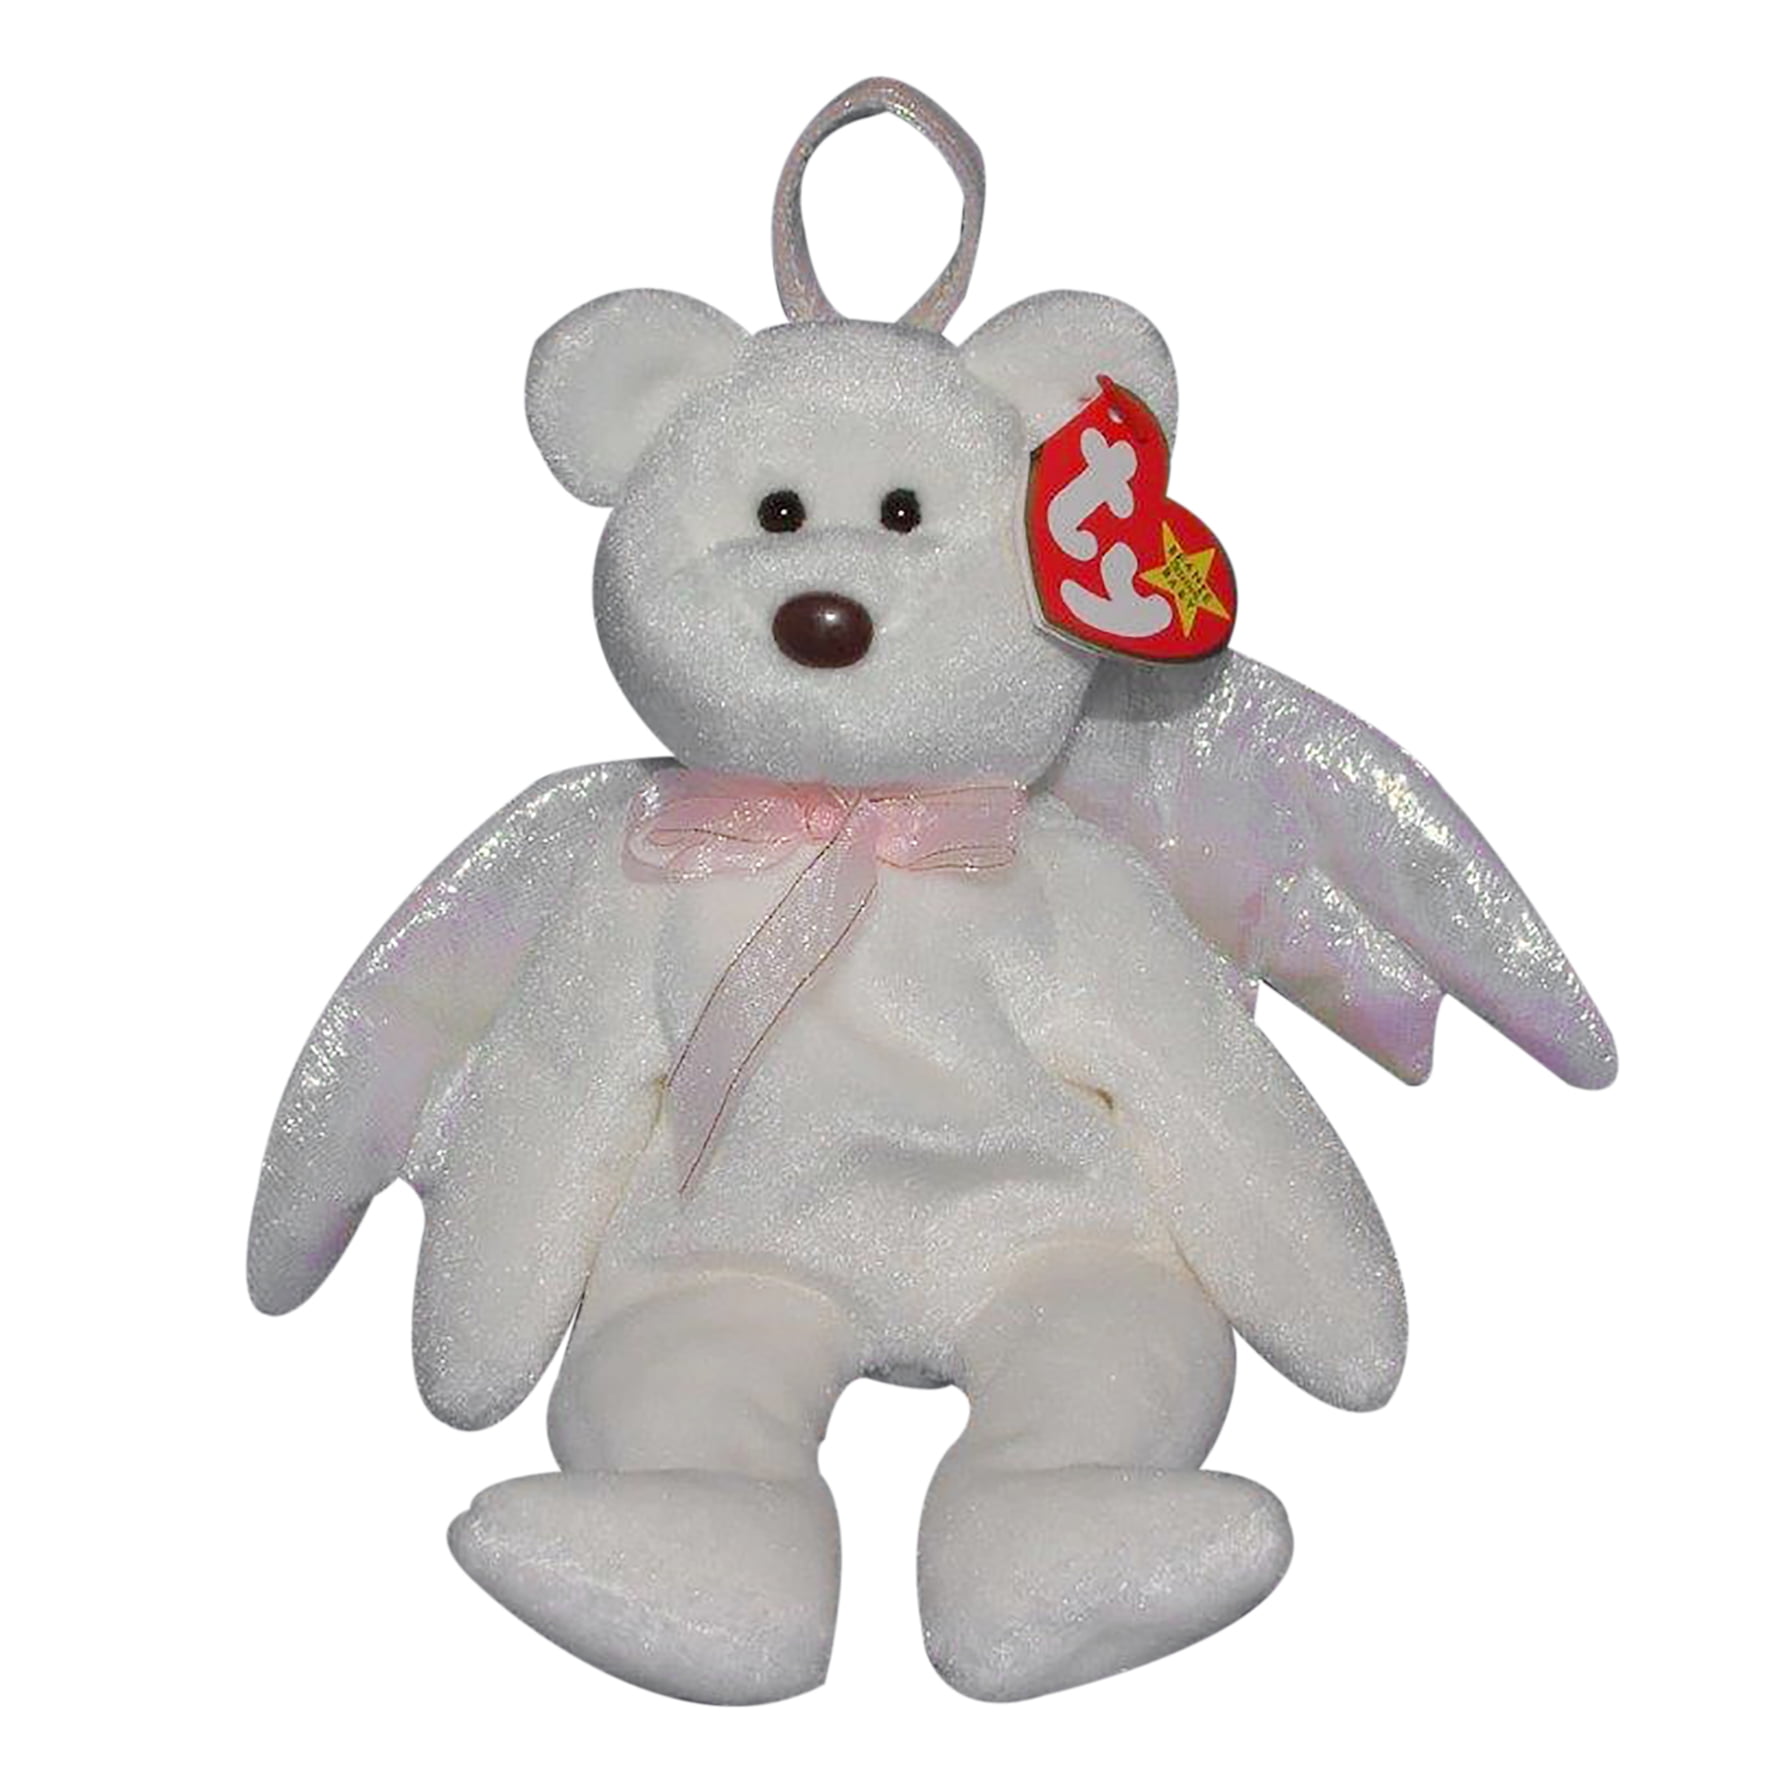 Ty Beanie Baby Baby Girl with blanket MWMT 